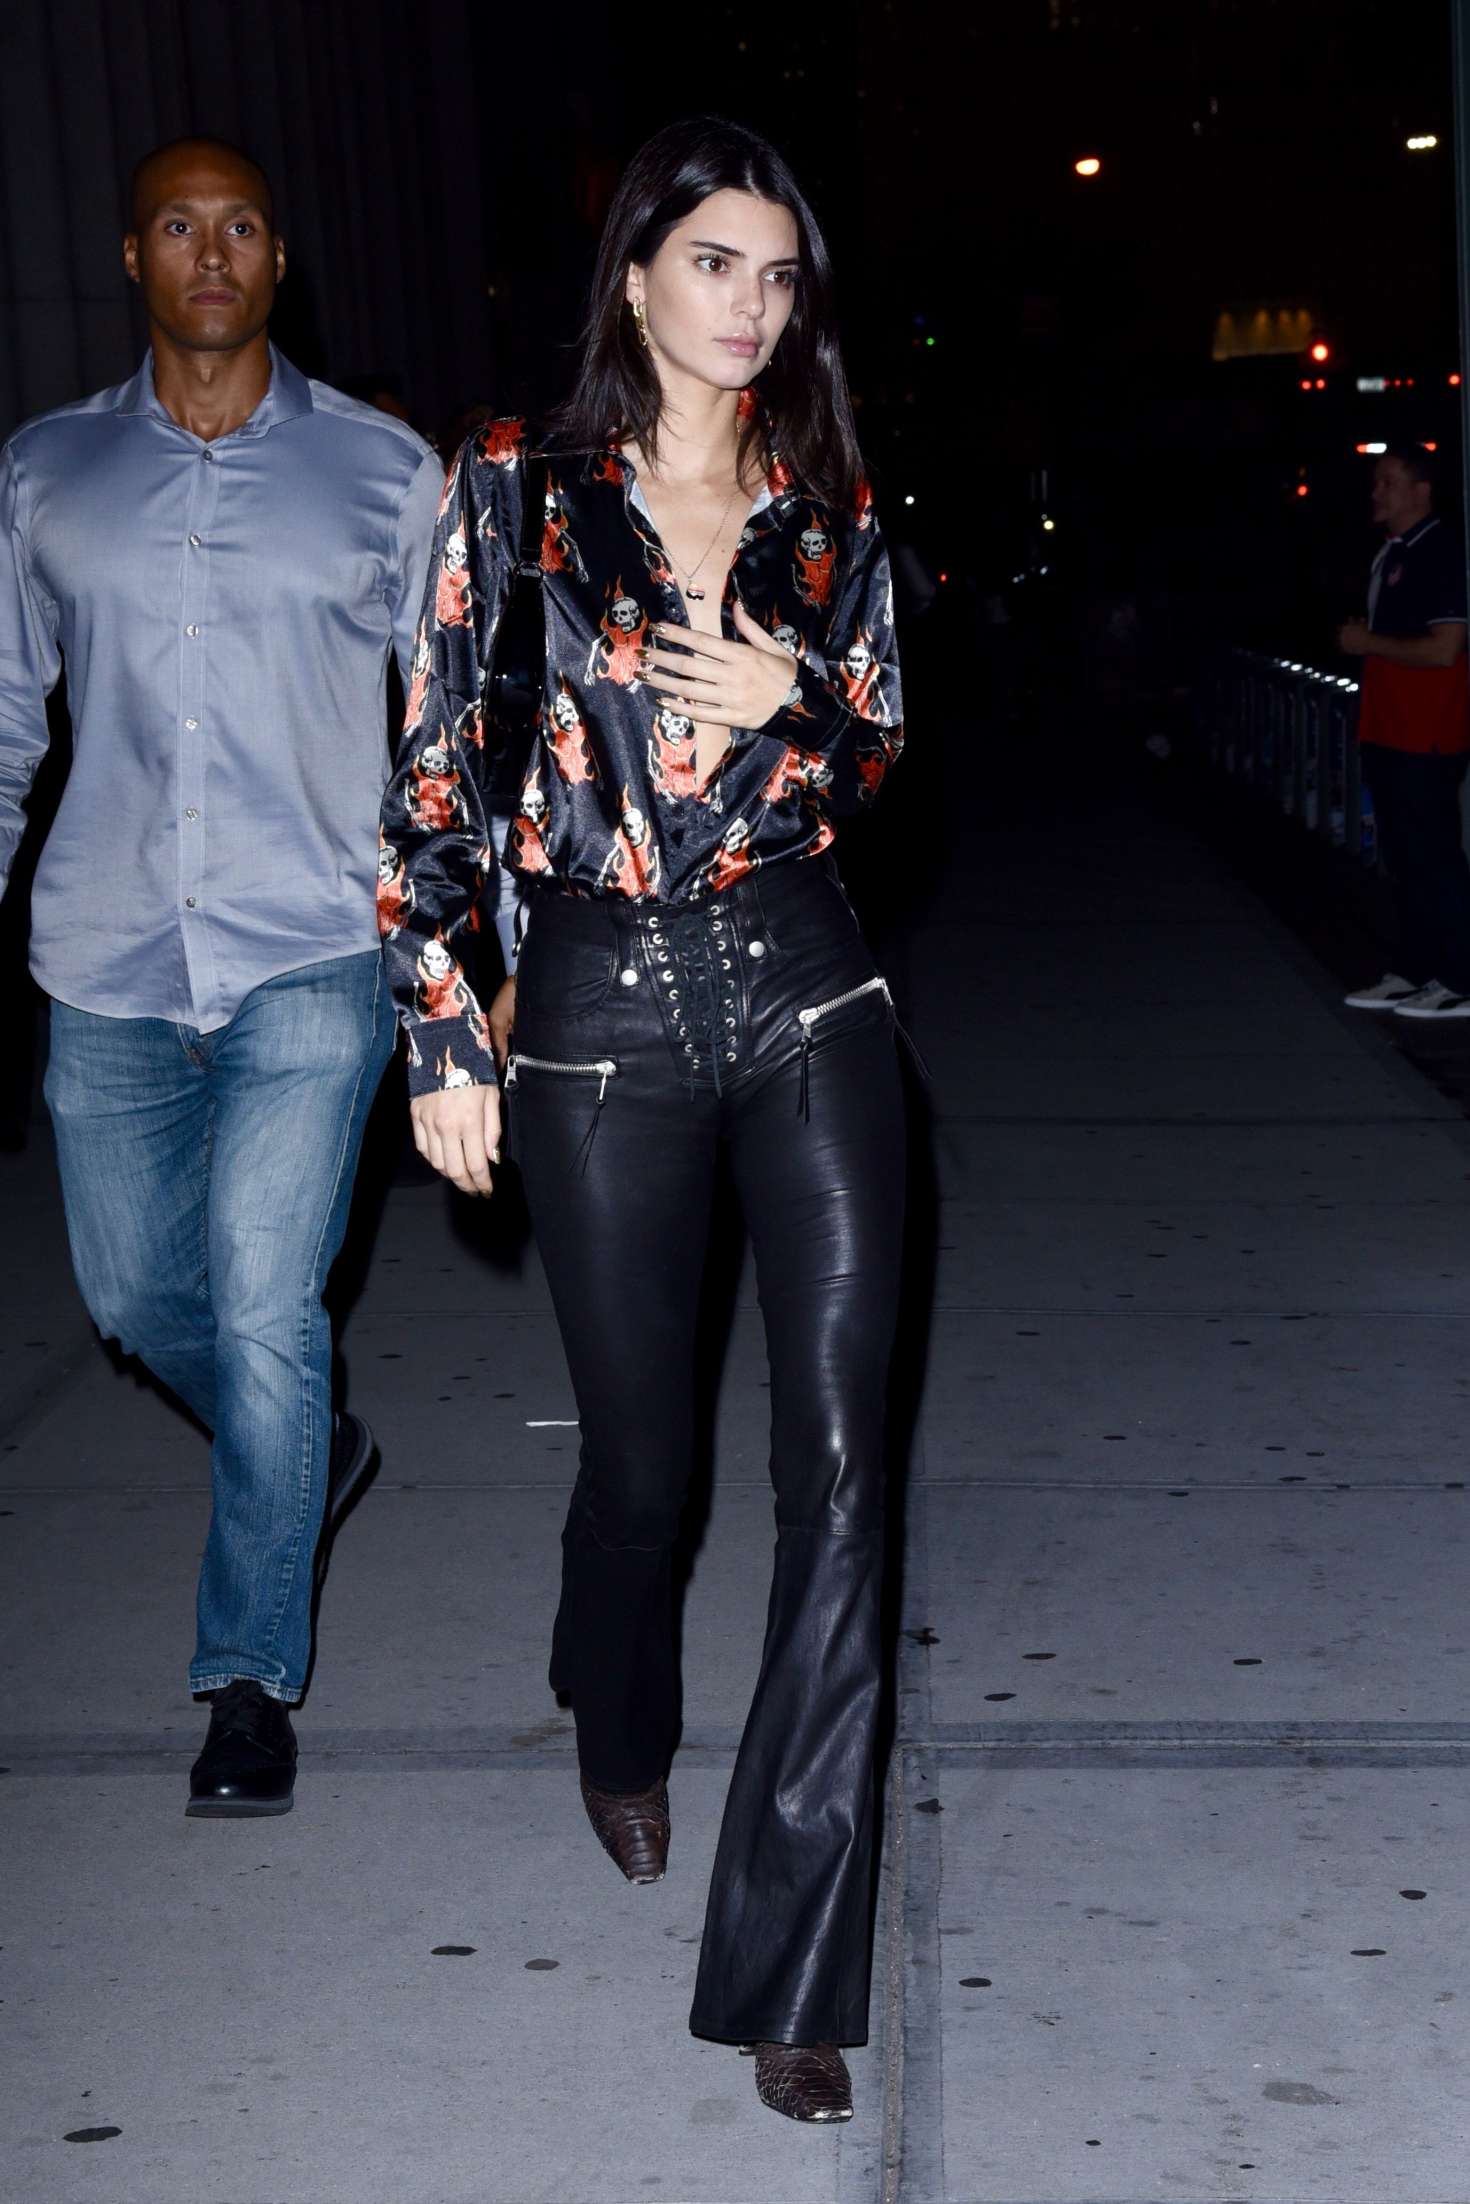 Kendall Jenner in Leather Pants at Nobu restaurant in New York